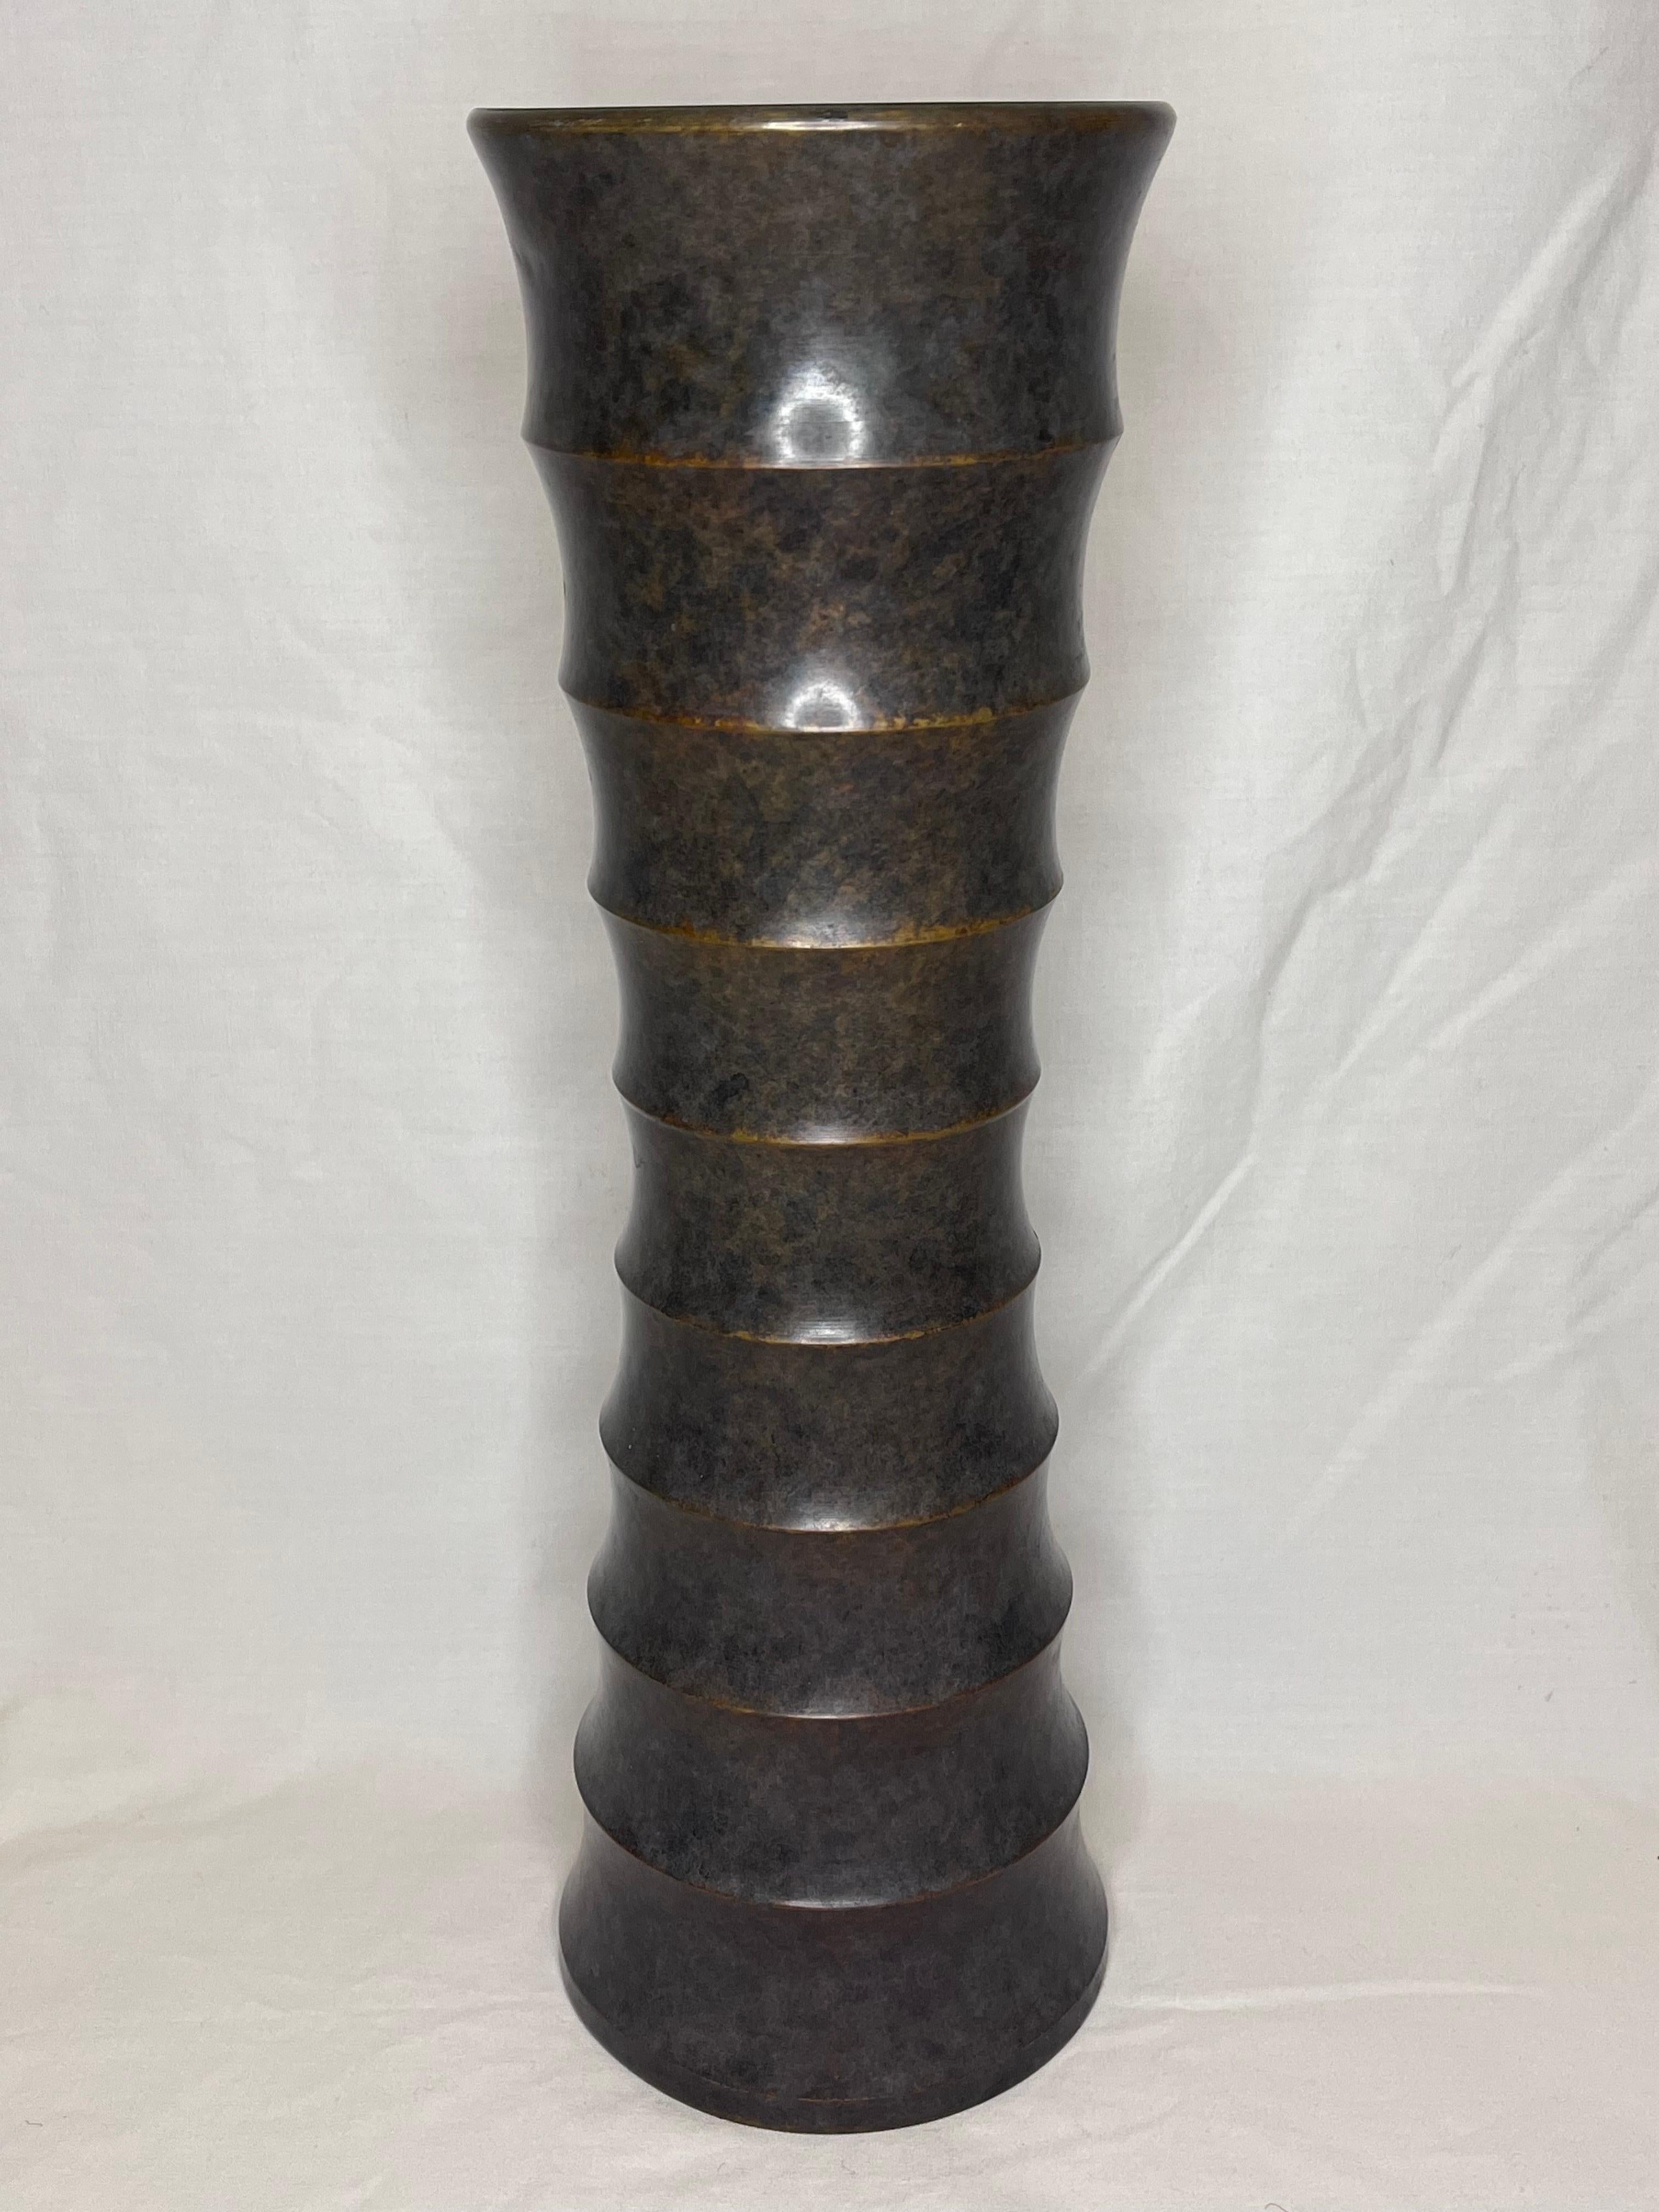 A beautifully hand finished bronze vase with a Brancusi inspired organic modern form. Classical, yet contemporary styling prepares this work of art to be at ease in any interior. The ribbed and tapered silhouette is delicate and powerful all at